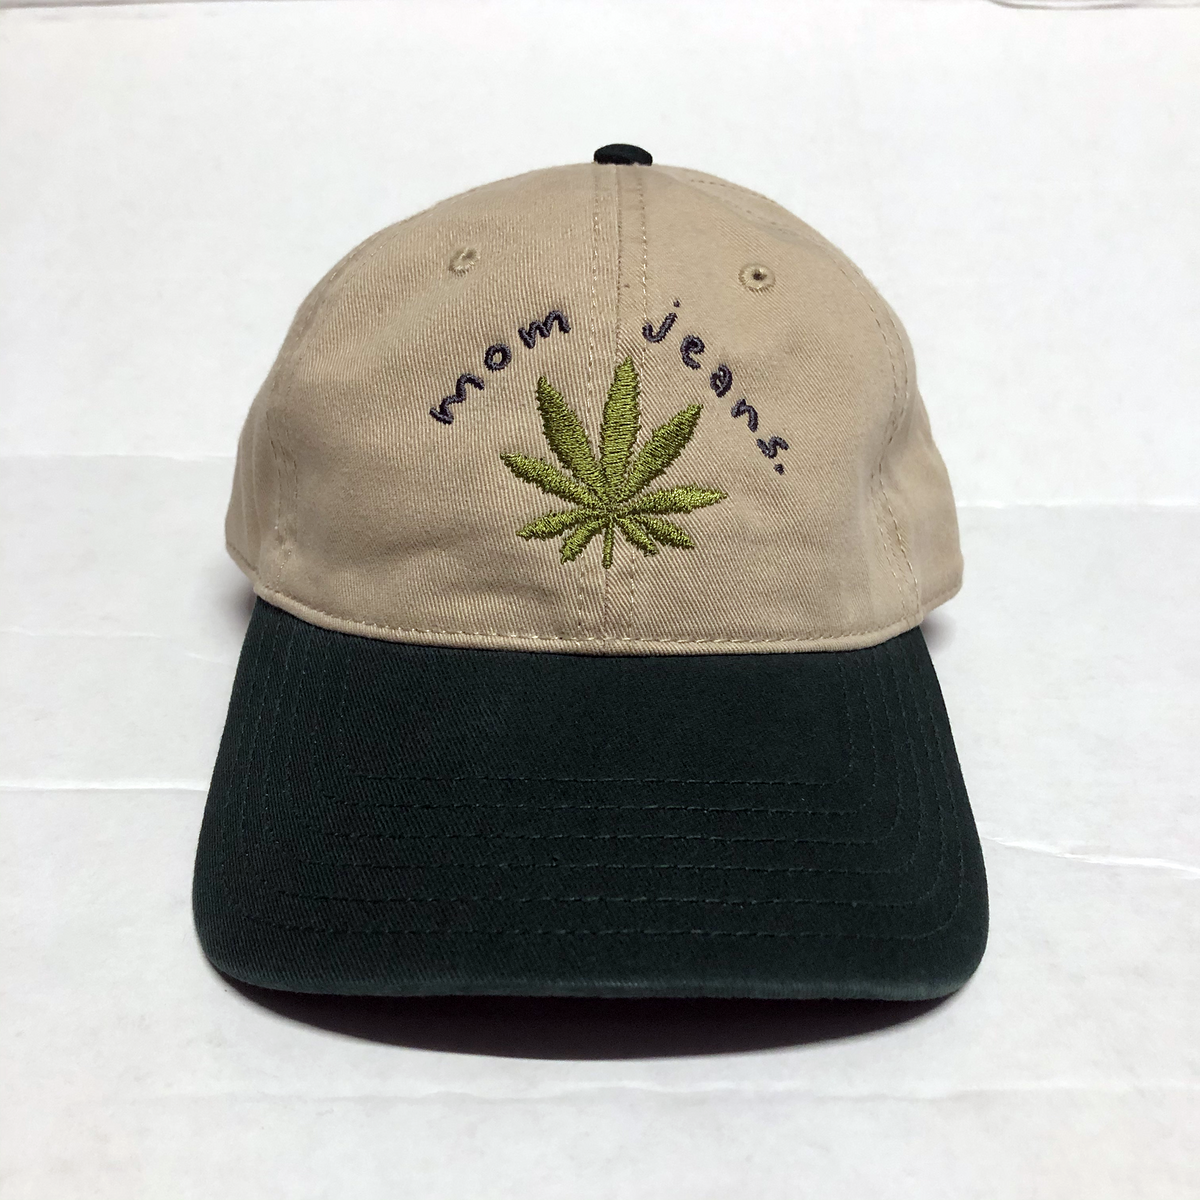 Mom Jeans - Weed Hat